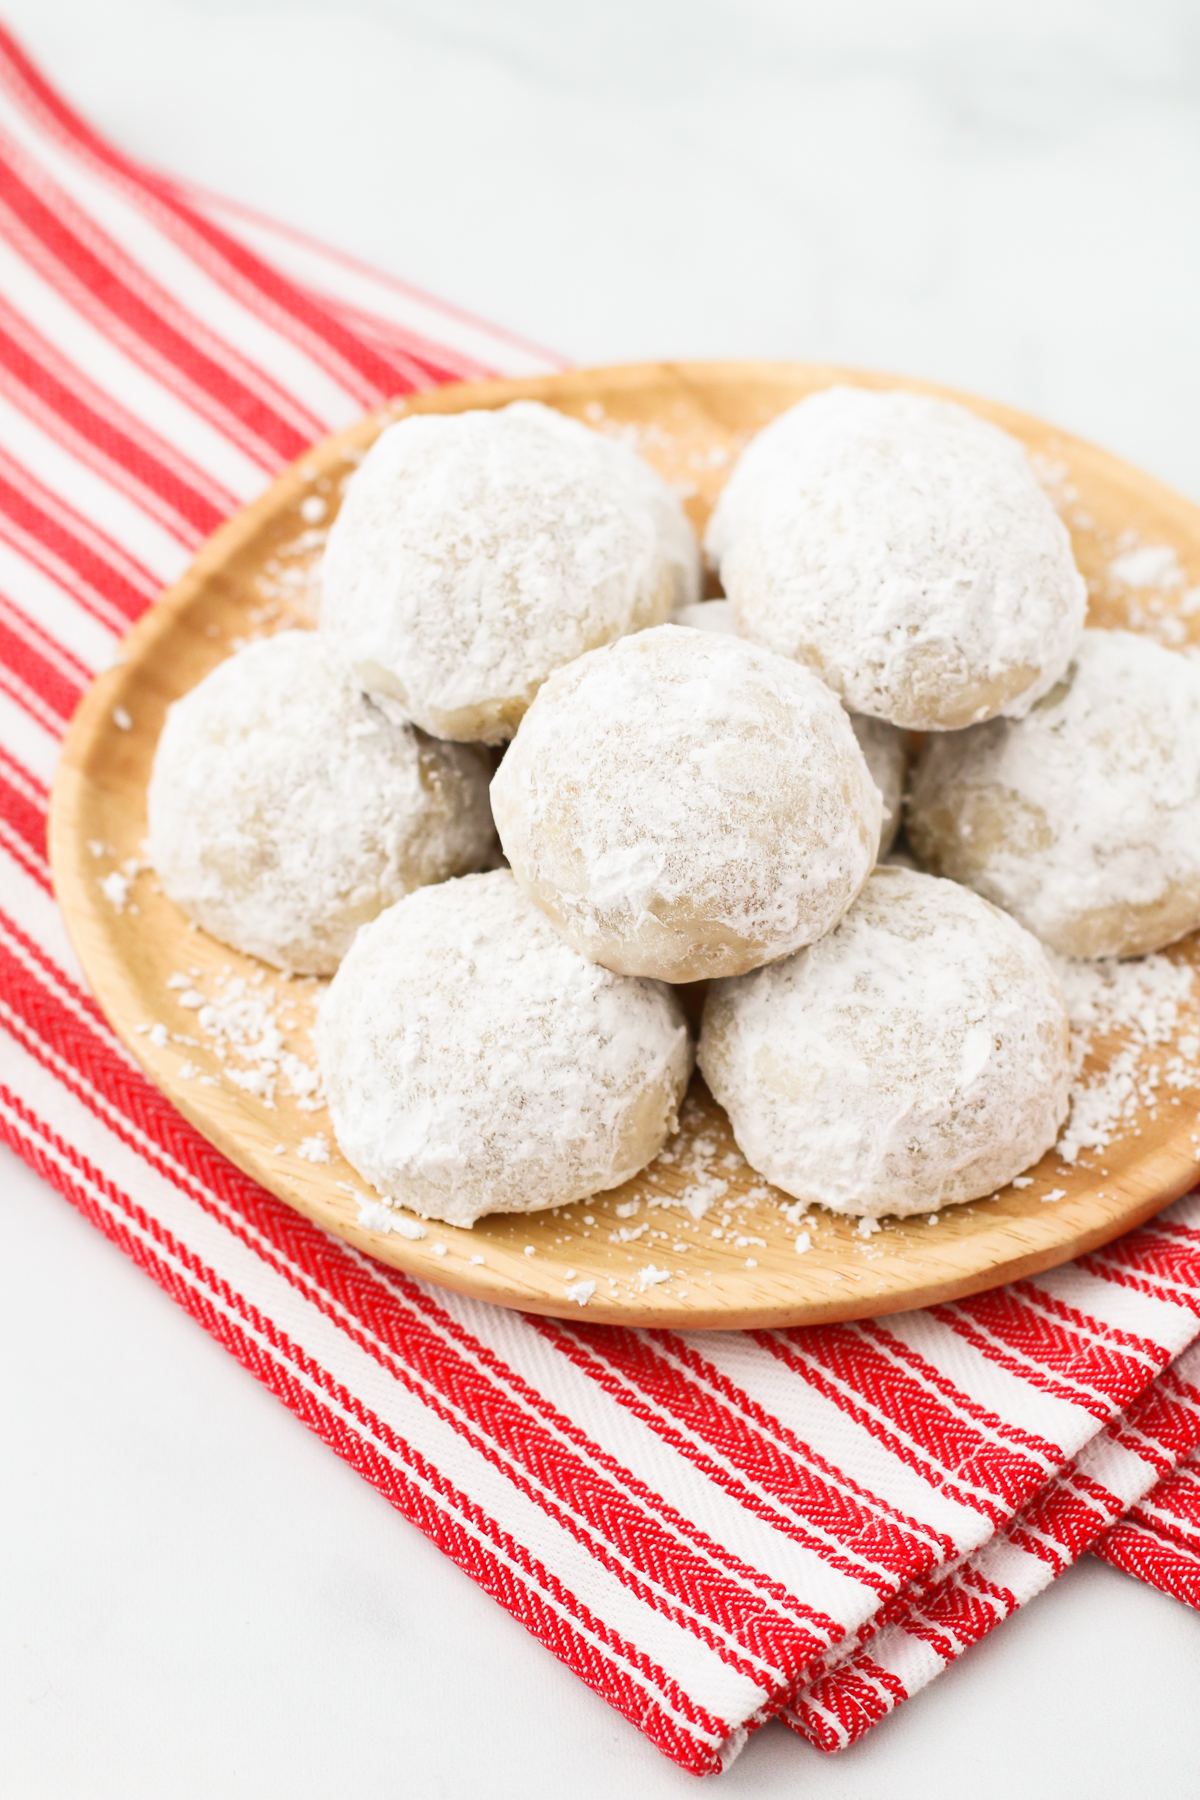 Gluten Free Vegan Snowball Cookies. Also known as Russian tea cakes, these powdered sugar coated cookies are made with flavorful toasted walnuts. A buttery, simple holiday cookie!